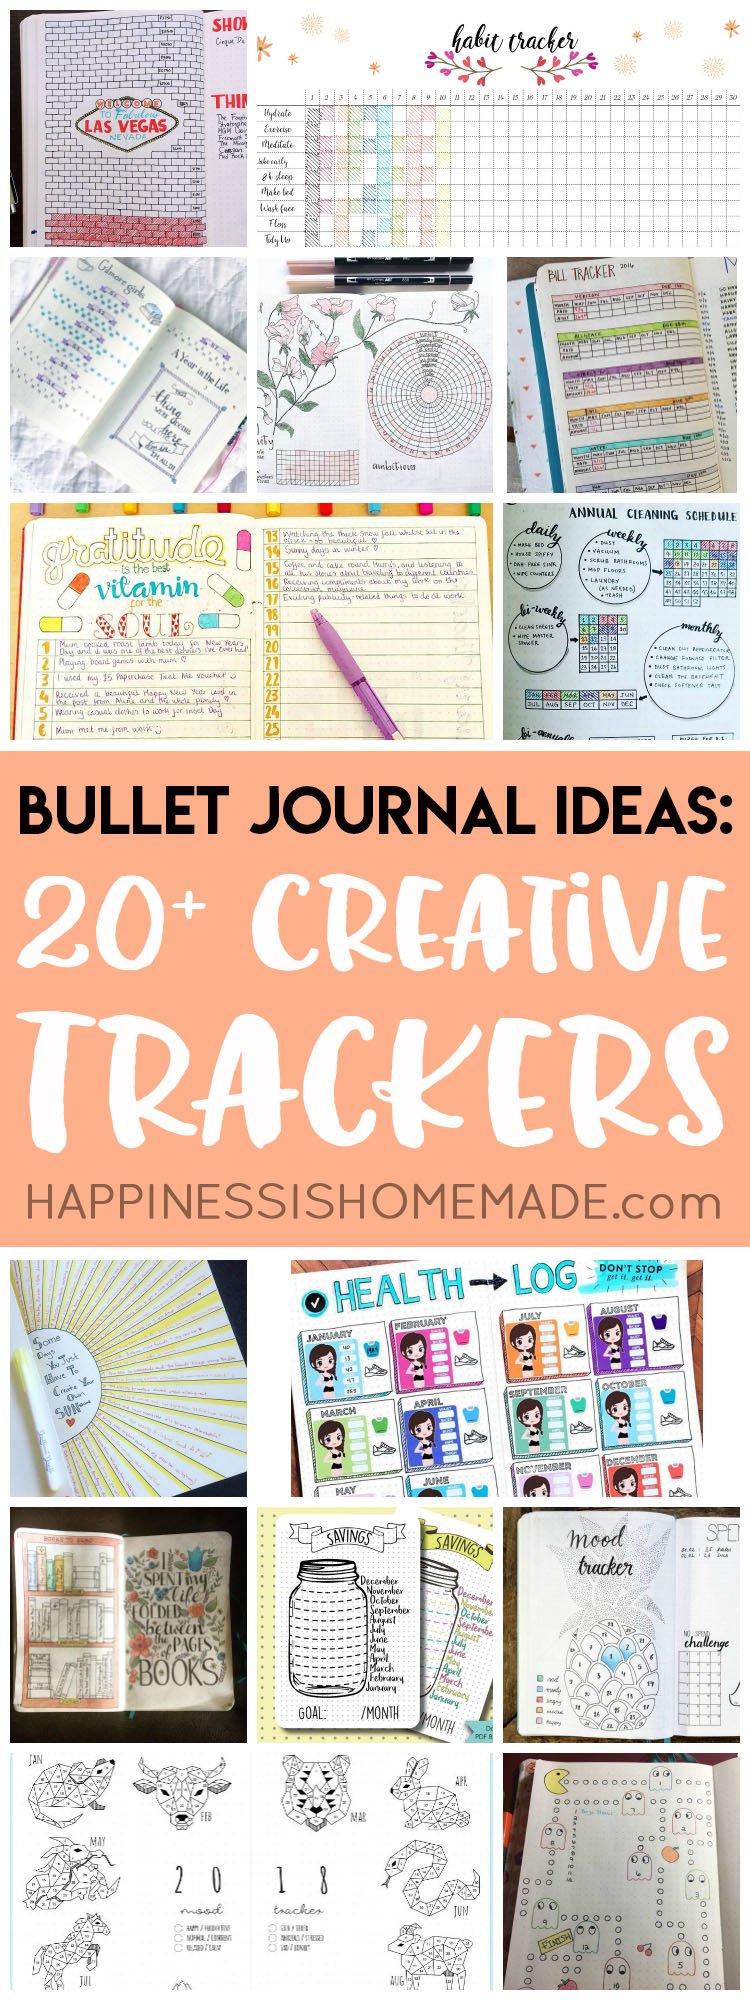 Looking for bullet journal ideas? These creative bullet journal tracker charts will help you get organized, save money, lo